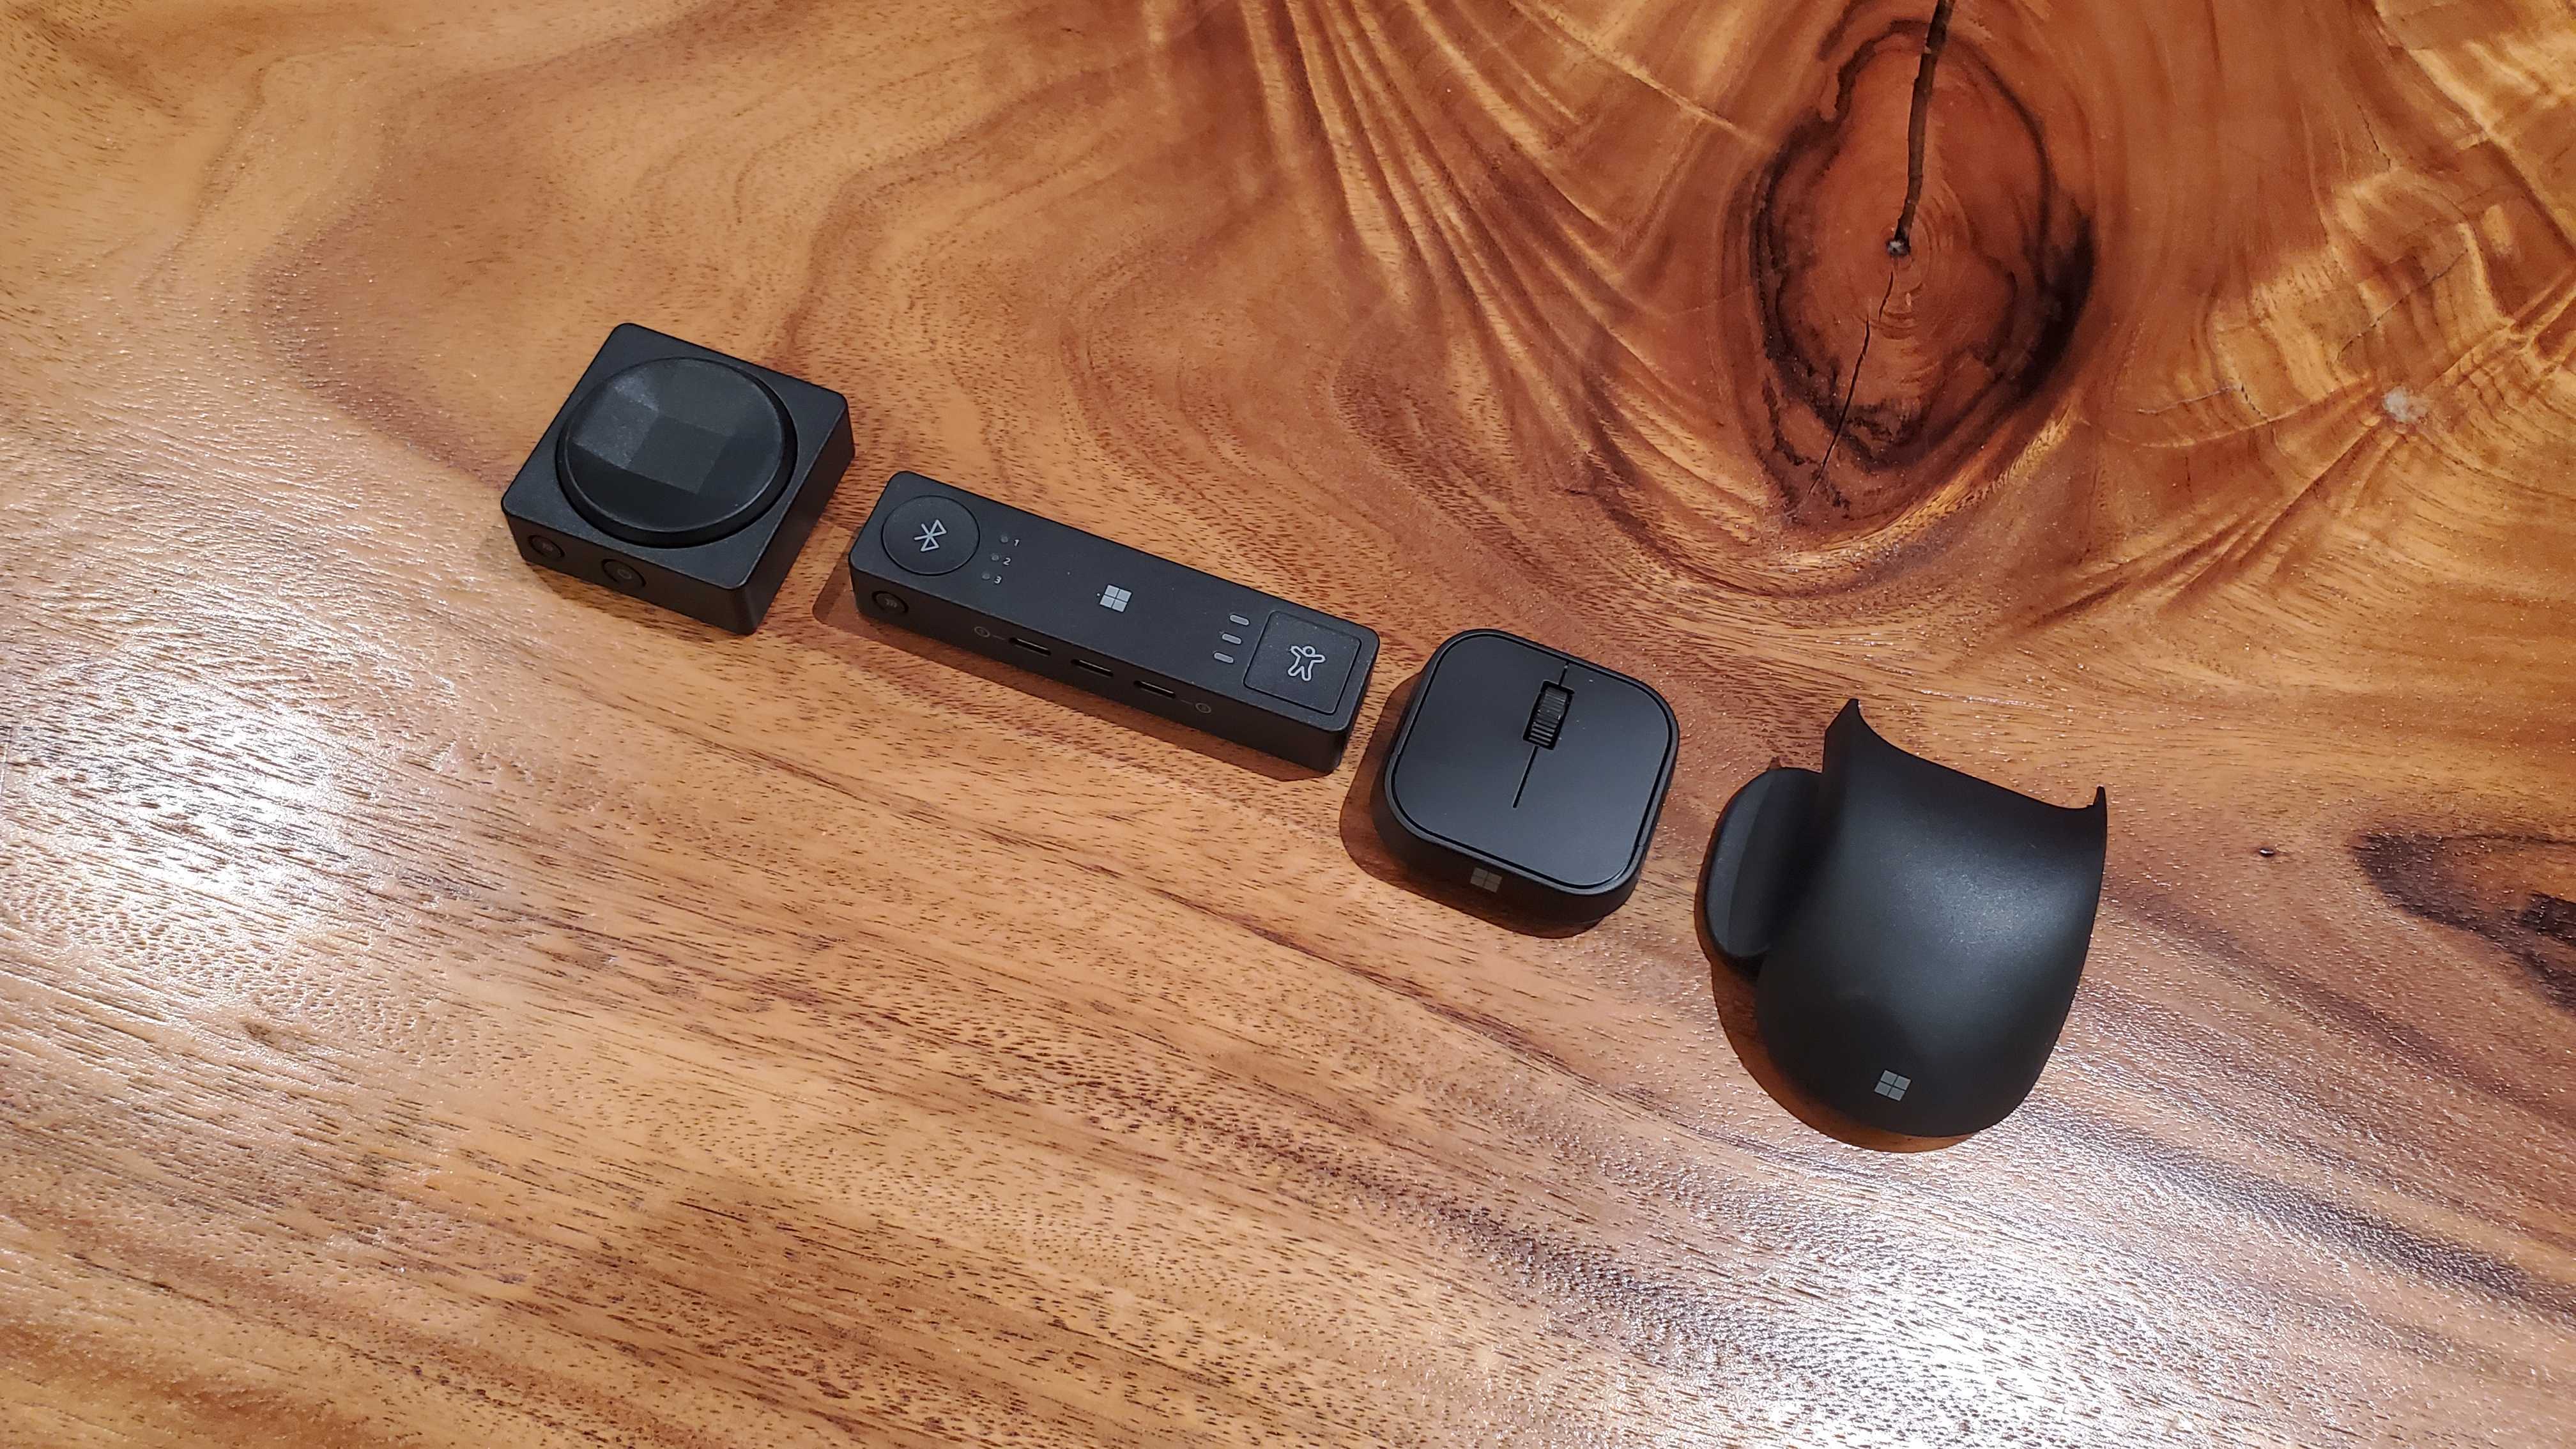 The D-pad, hub, mouse, and mouse tail/thumb rest in the Microsoft Adaptive Accessories set